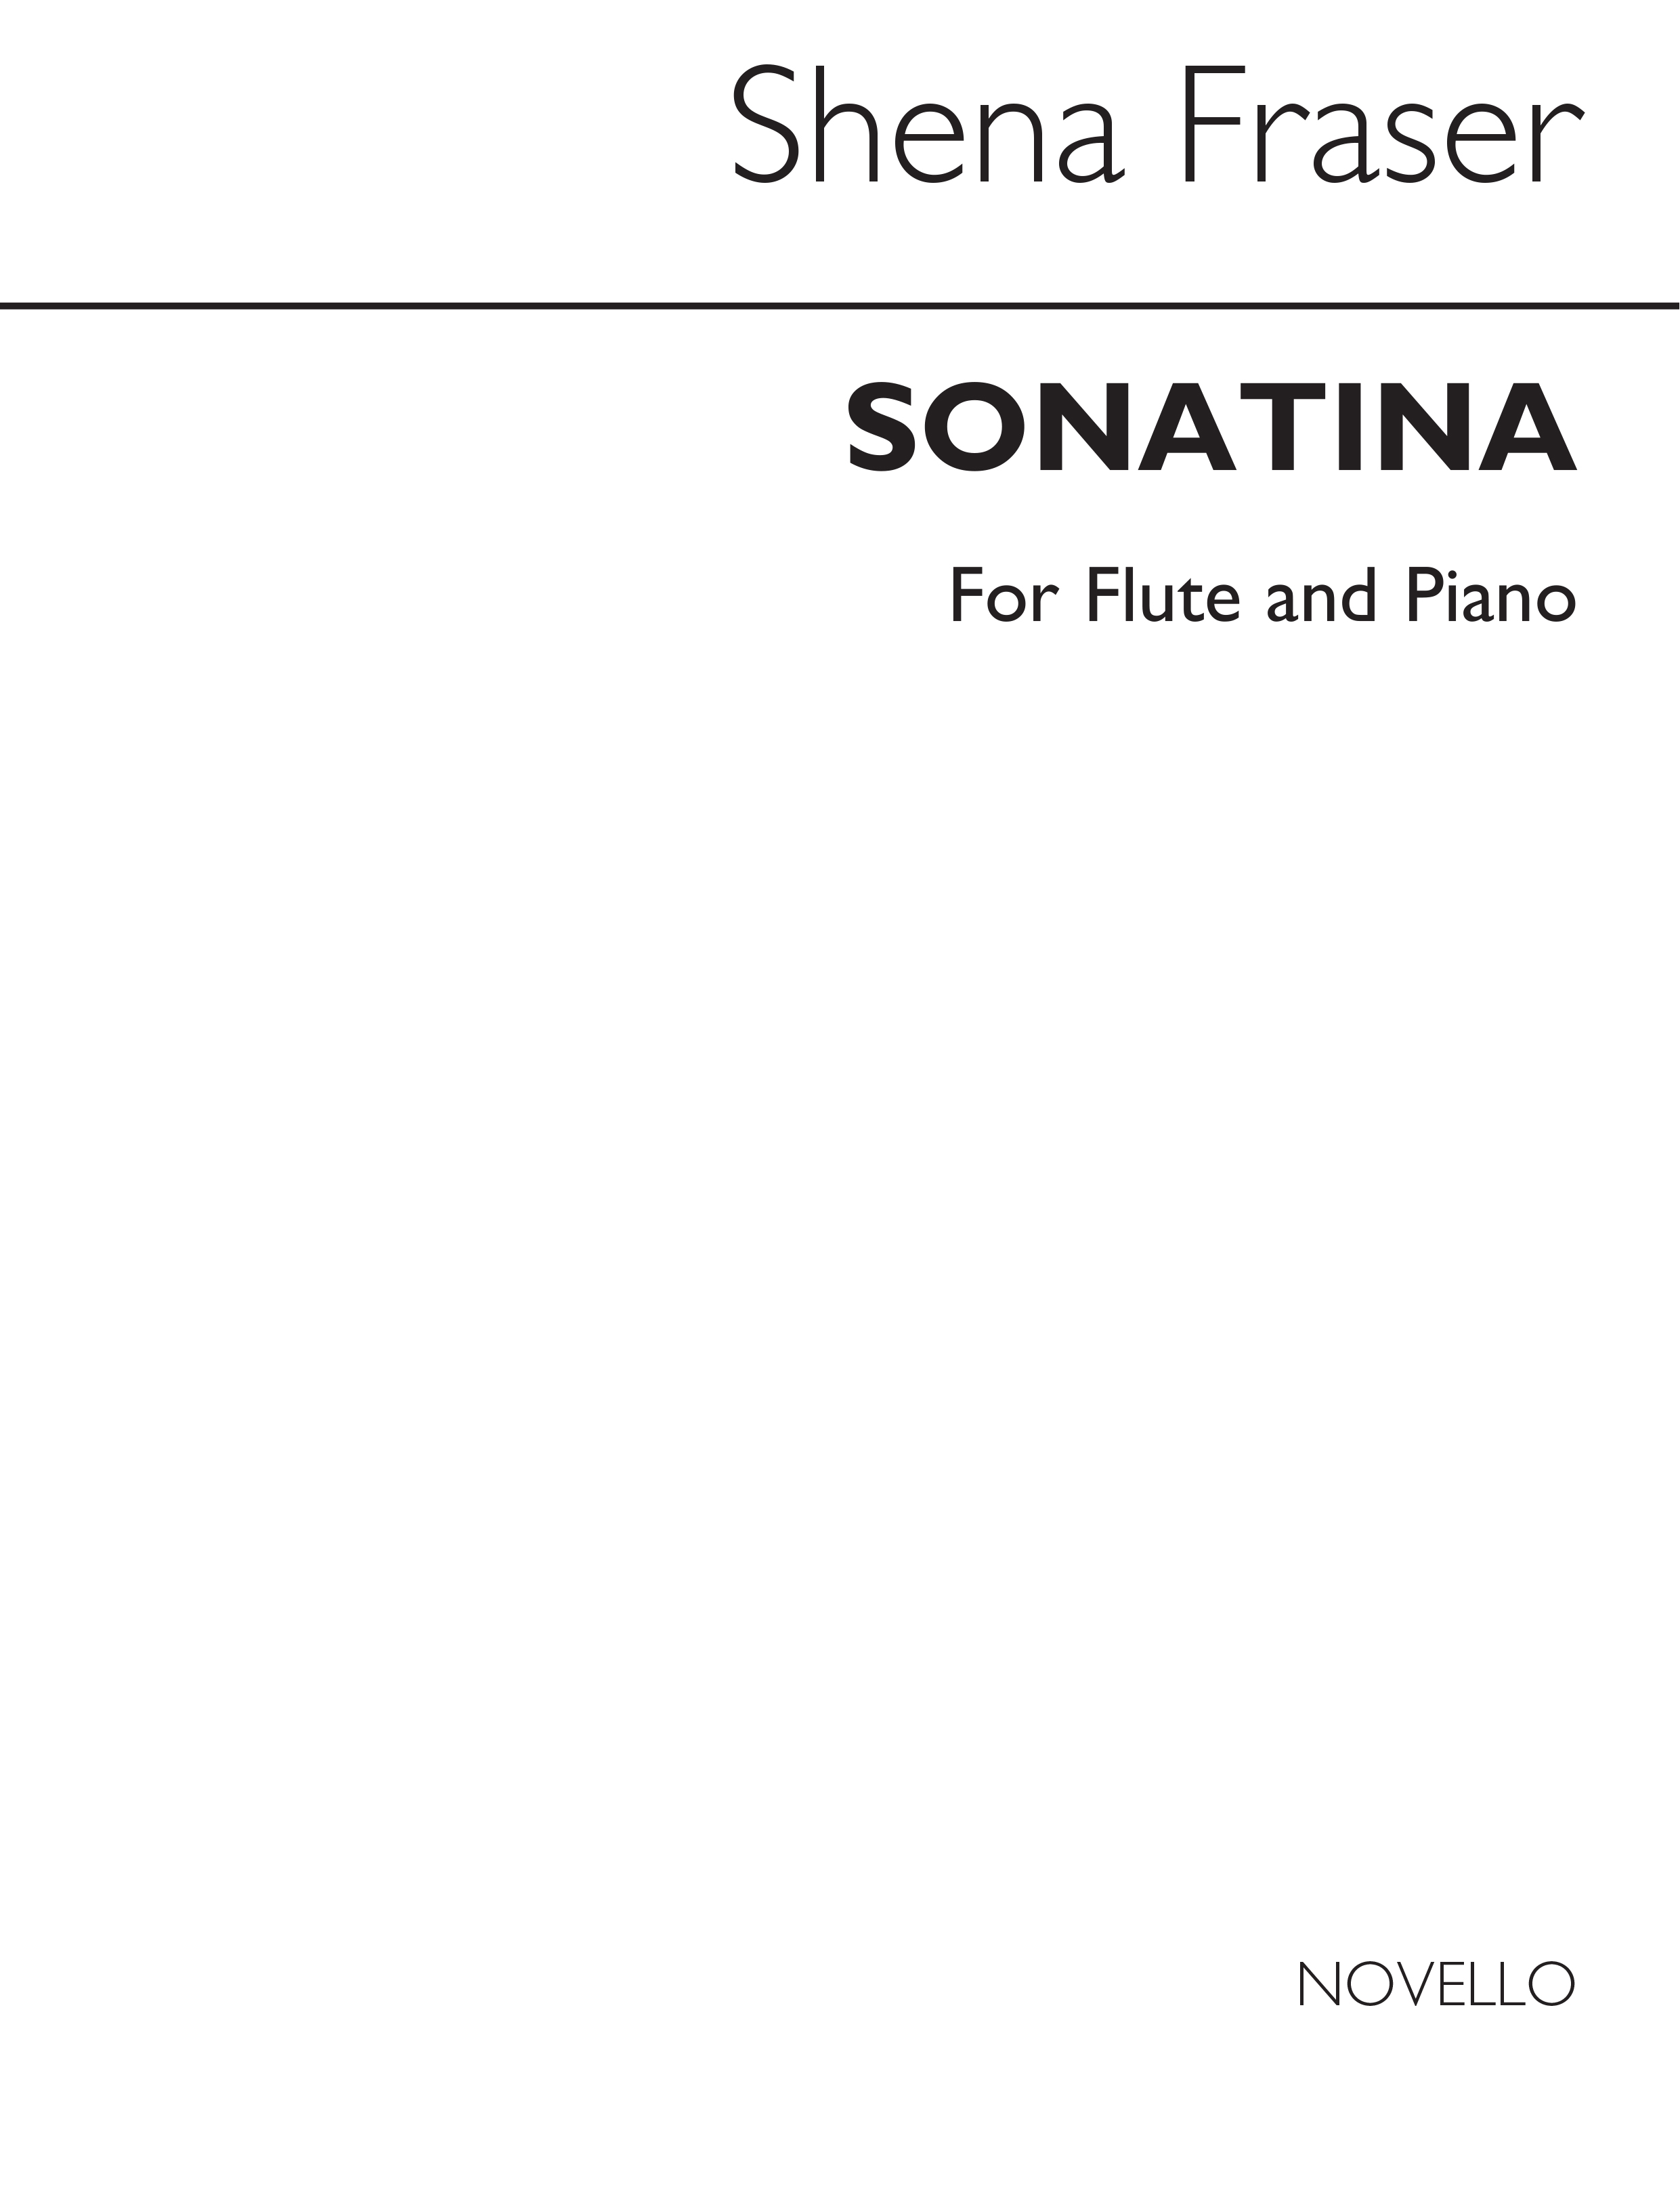 Fraser: Sonatina for Flute and Piano